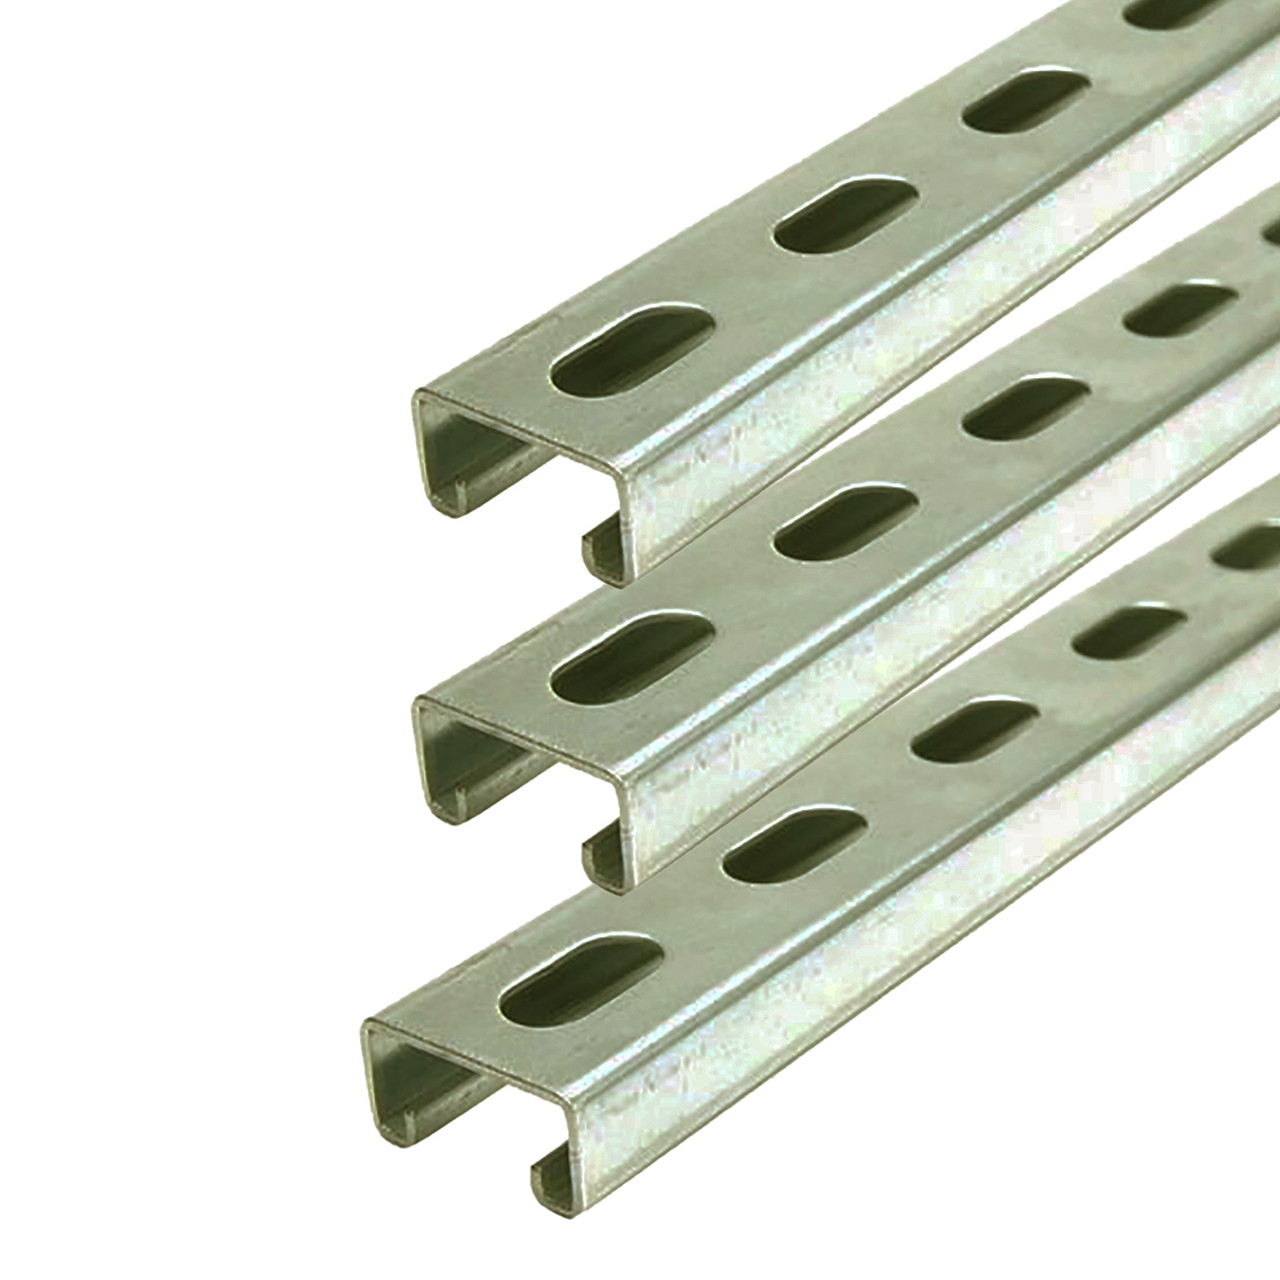 0.812" x 1.625" x 36 inches (3 Pack), Gold Galvanized Steel, Slotted Strut Channel, 12 ga.